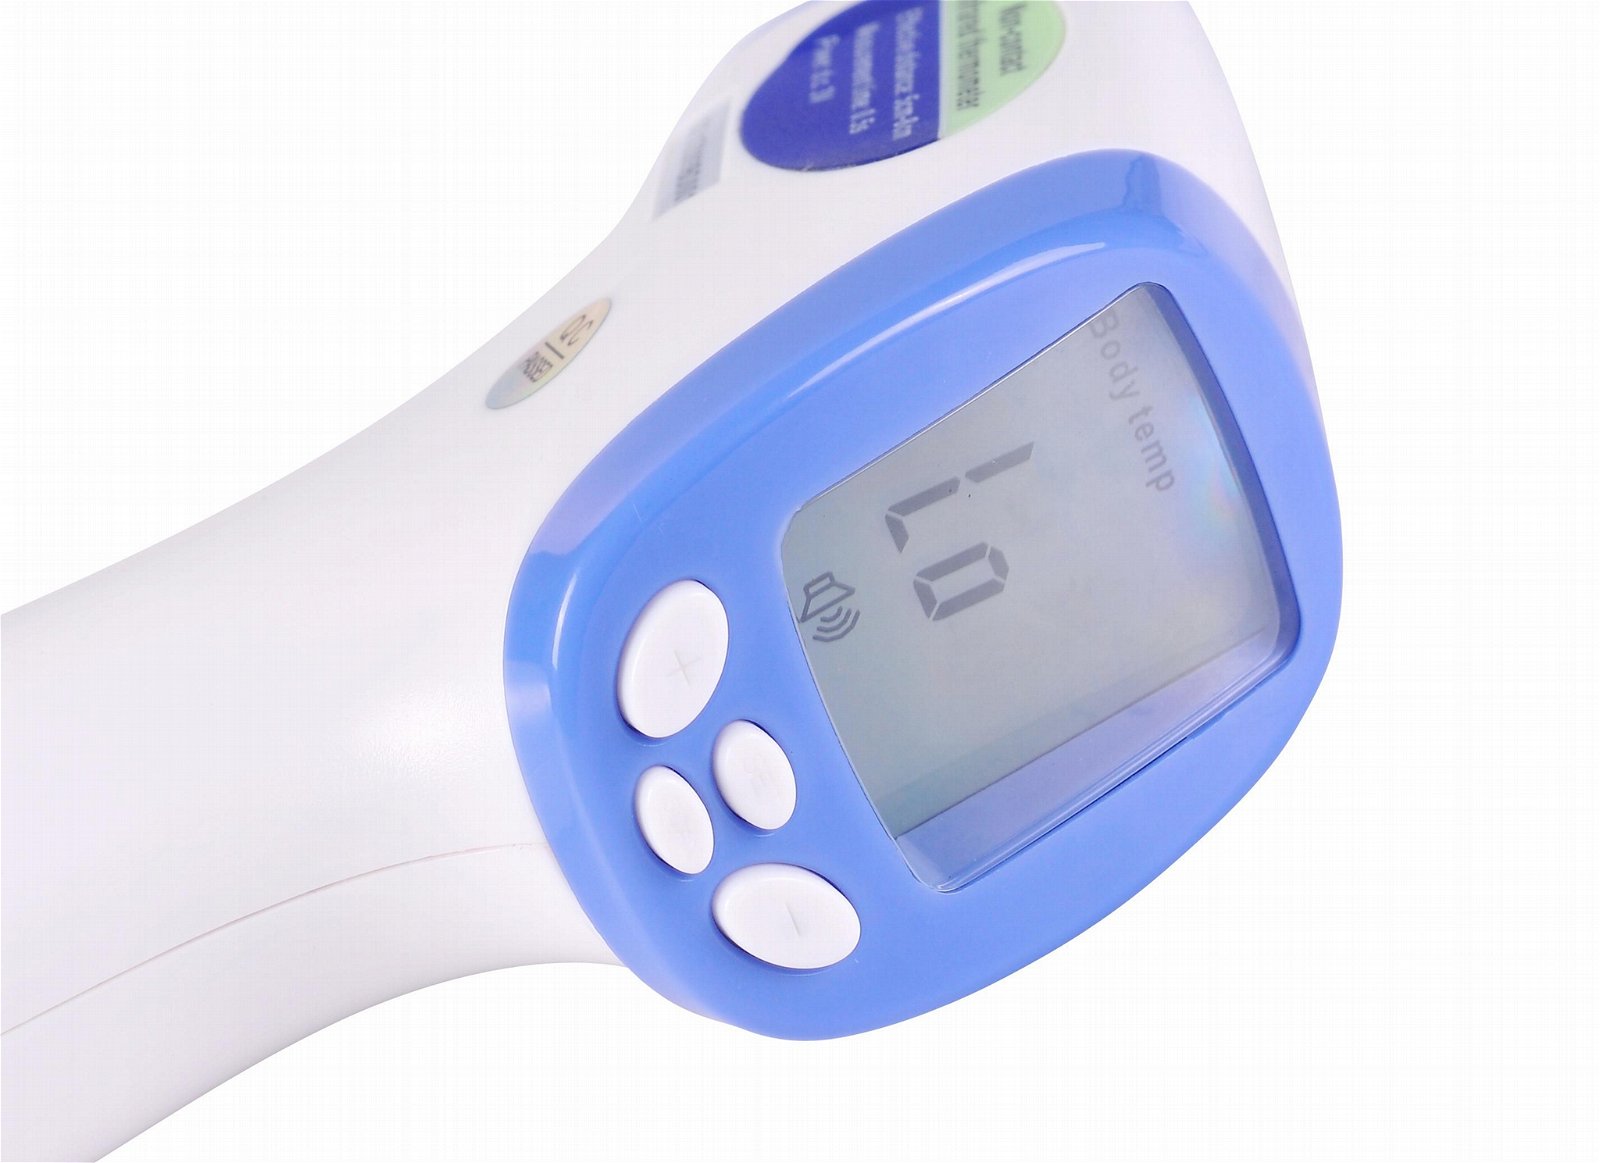 non-conatct infrared forehead thermometer for baby and adult 2